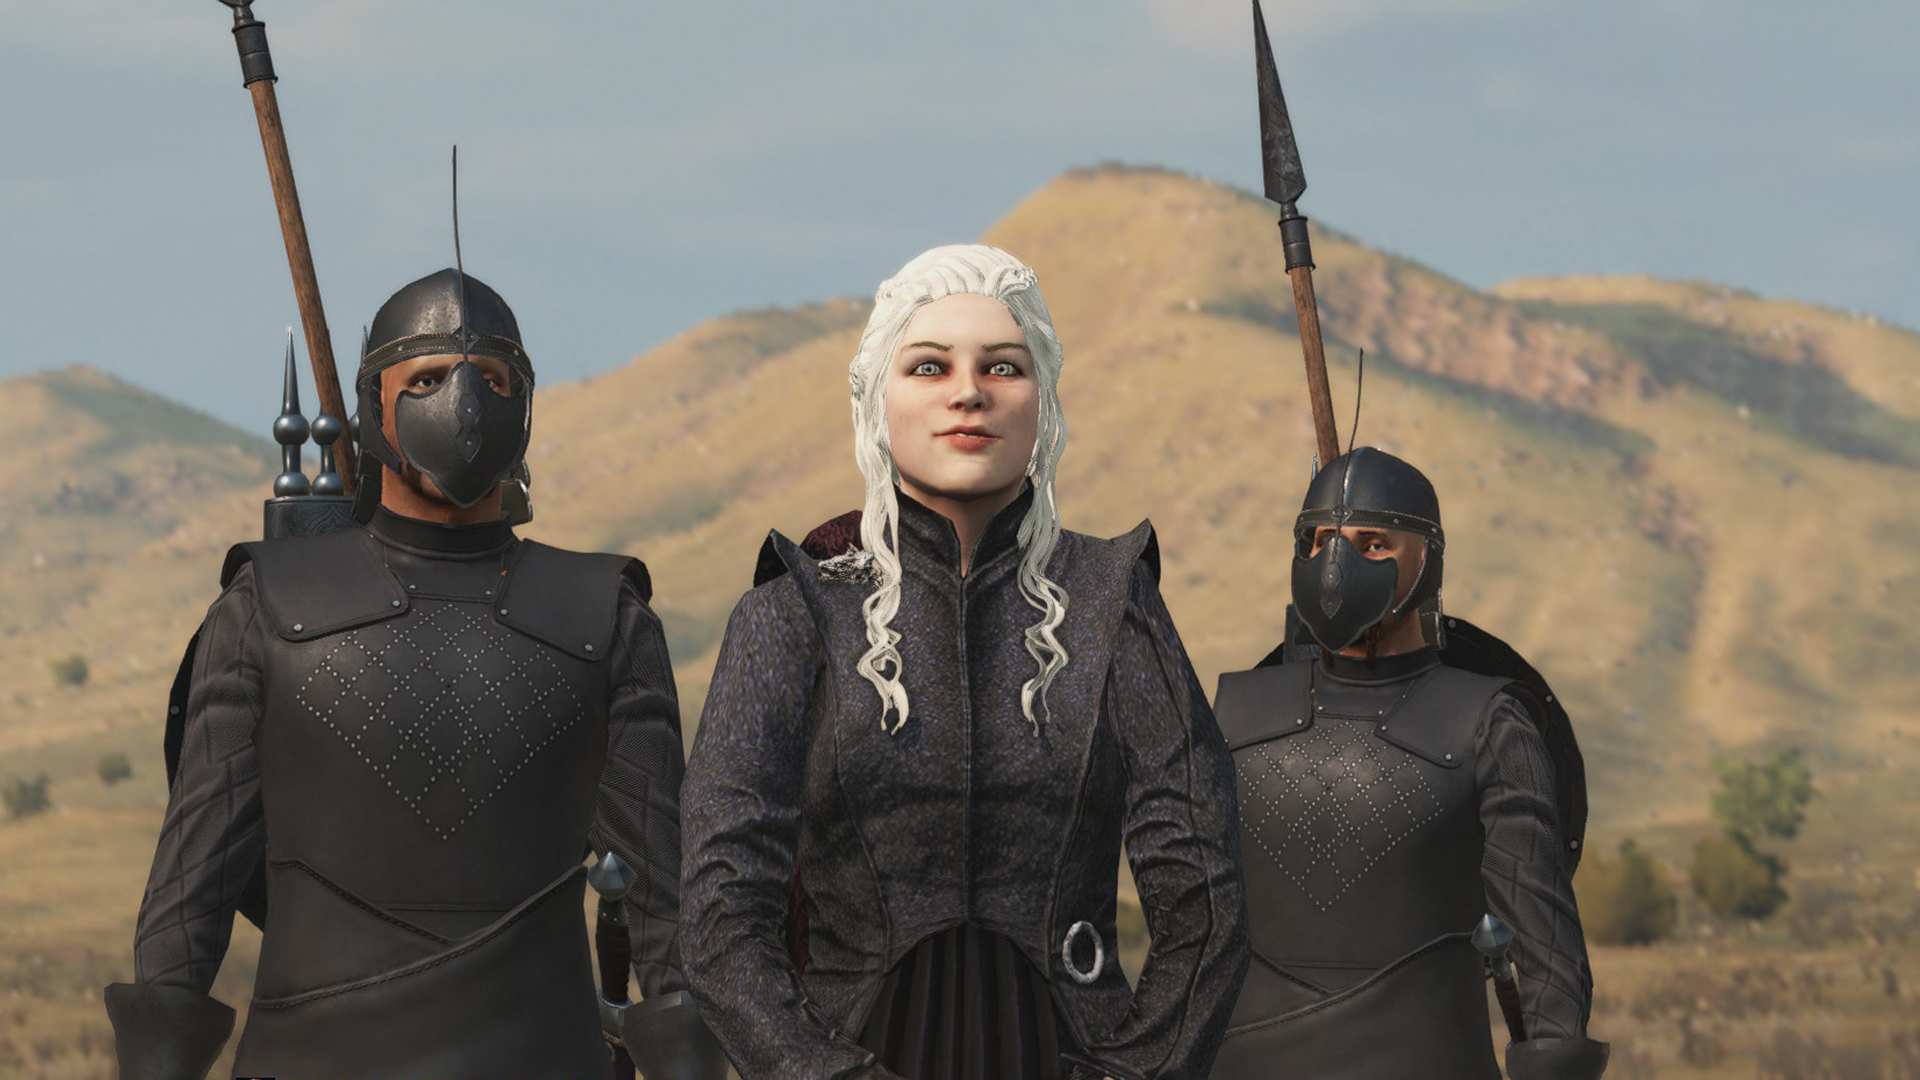 Daenerys image - A Clash of Kings (Game of Thrones) mod for Mount